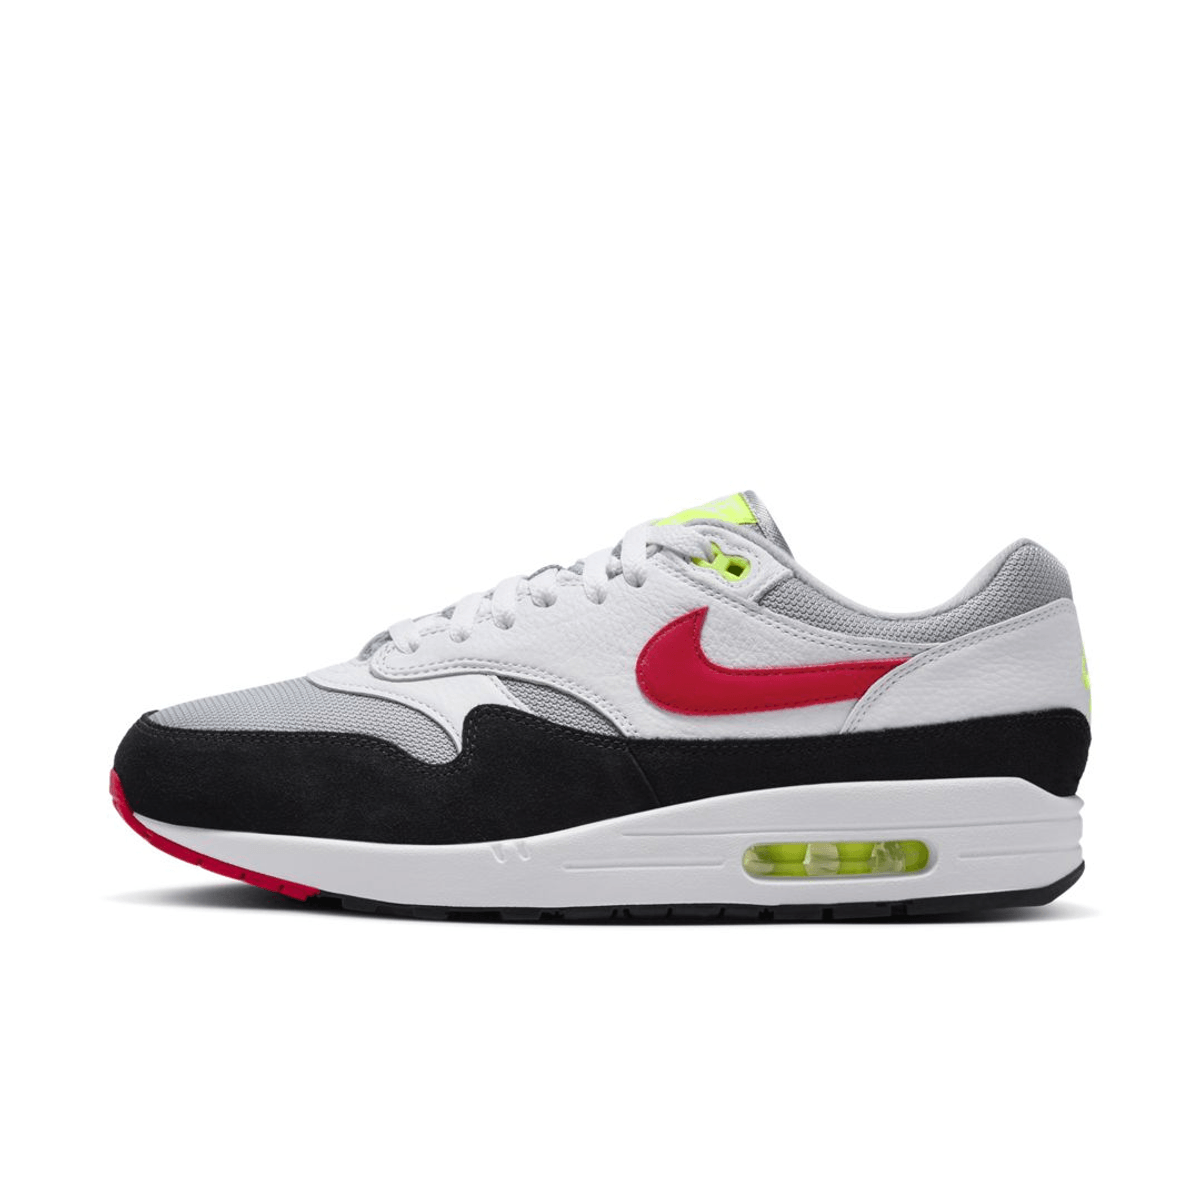 Official Images Of The Nike Air Max 1 "Chili Volt"